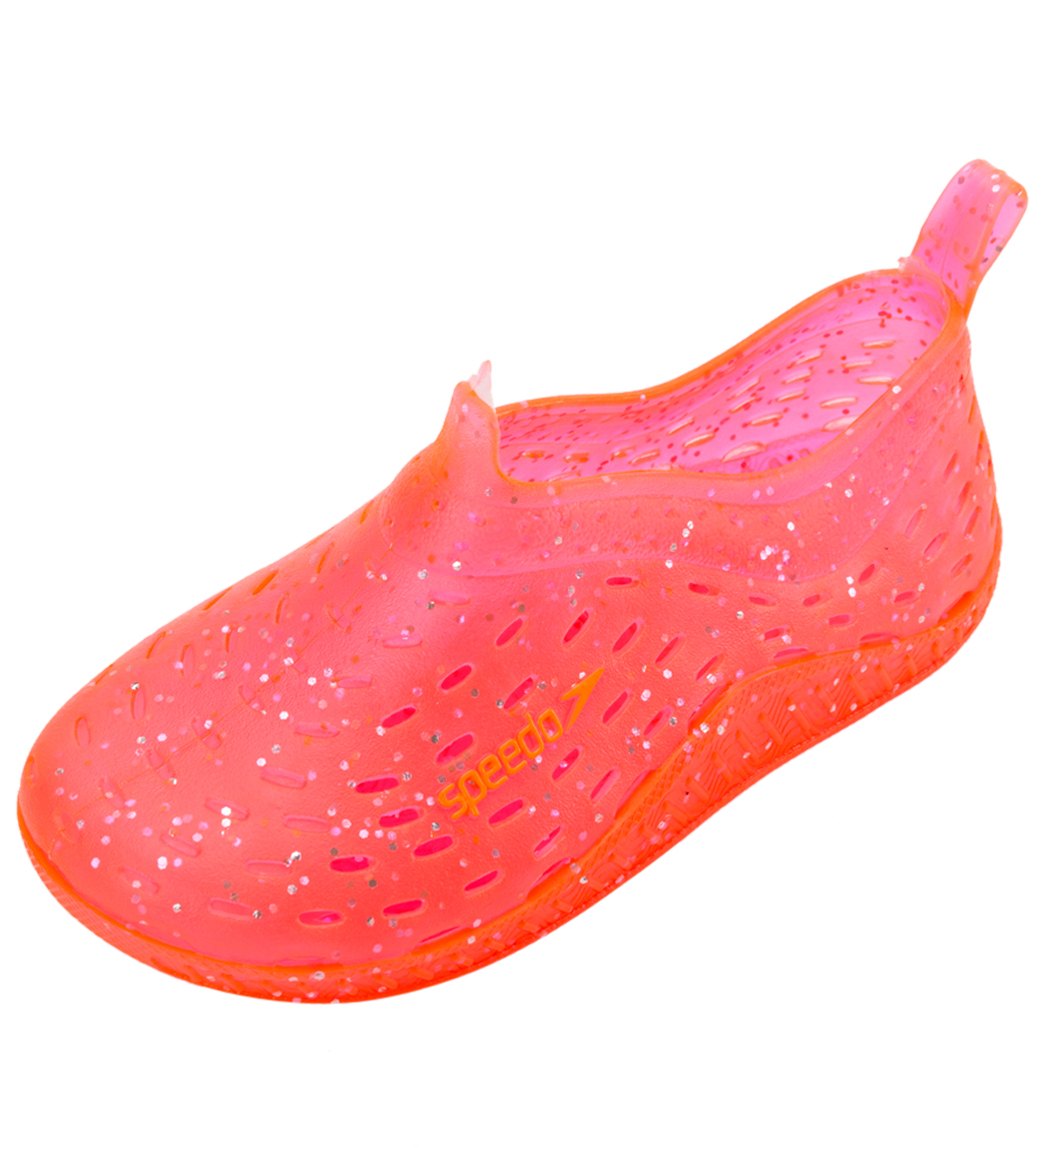 Speedo Toddler's Exsqueeze Me Jelly Glitter Water Shoe at SwimOutlet.com